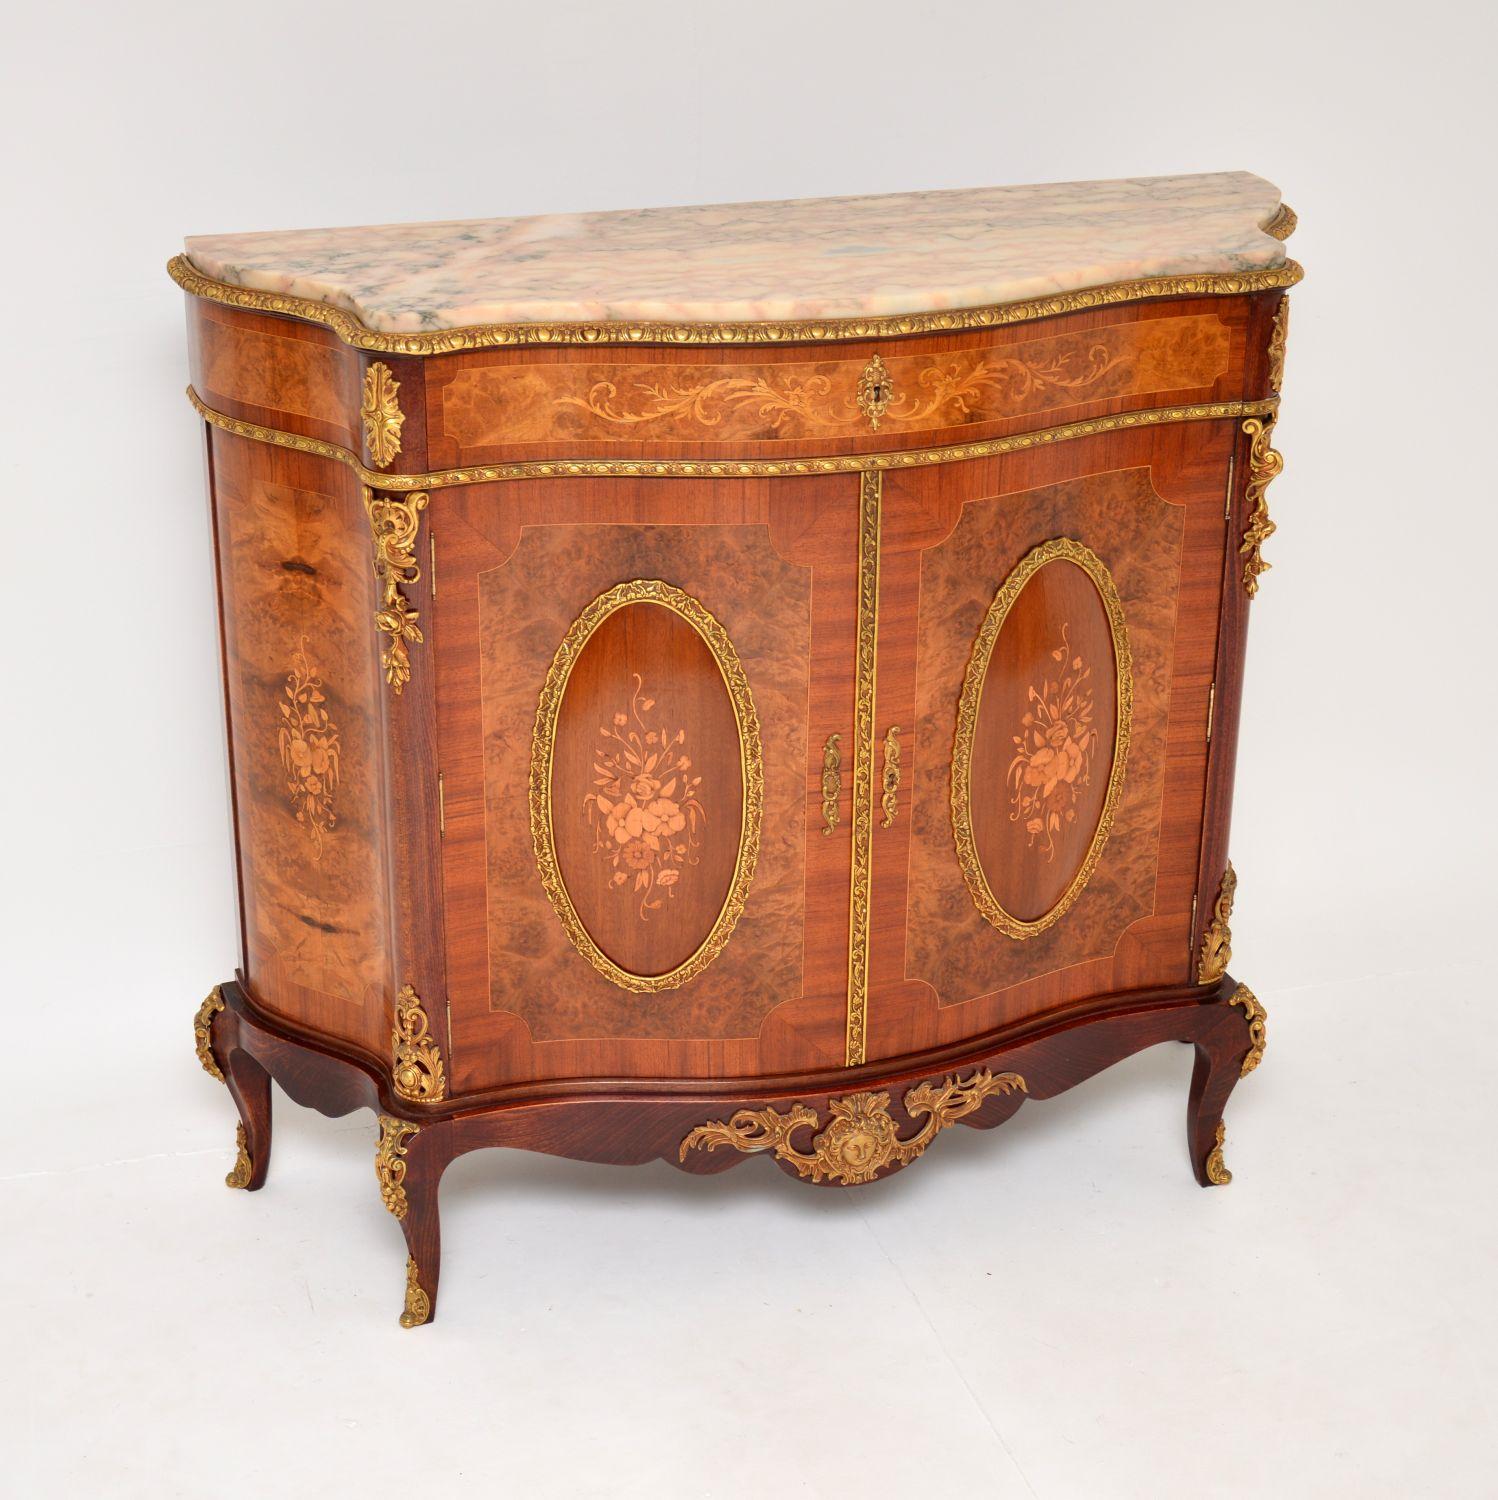 An absolutely gorgeous and extremely impressive antique French style cabinet. This was made in France, it dates from around the 1930-50’s.

It is made from a combination of burr walnut and other woods, with beautiful floral marquetry in satin wood.